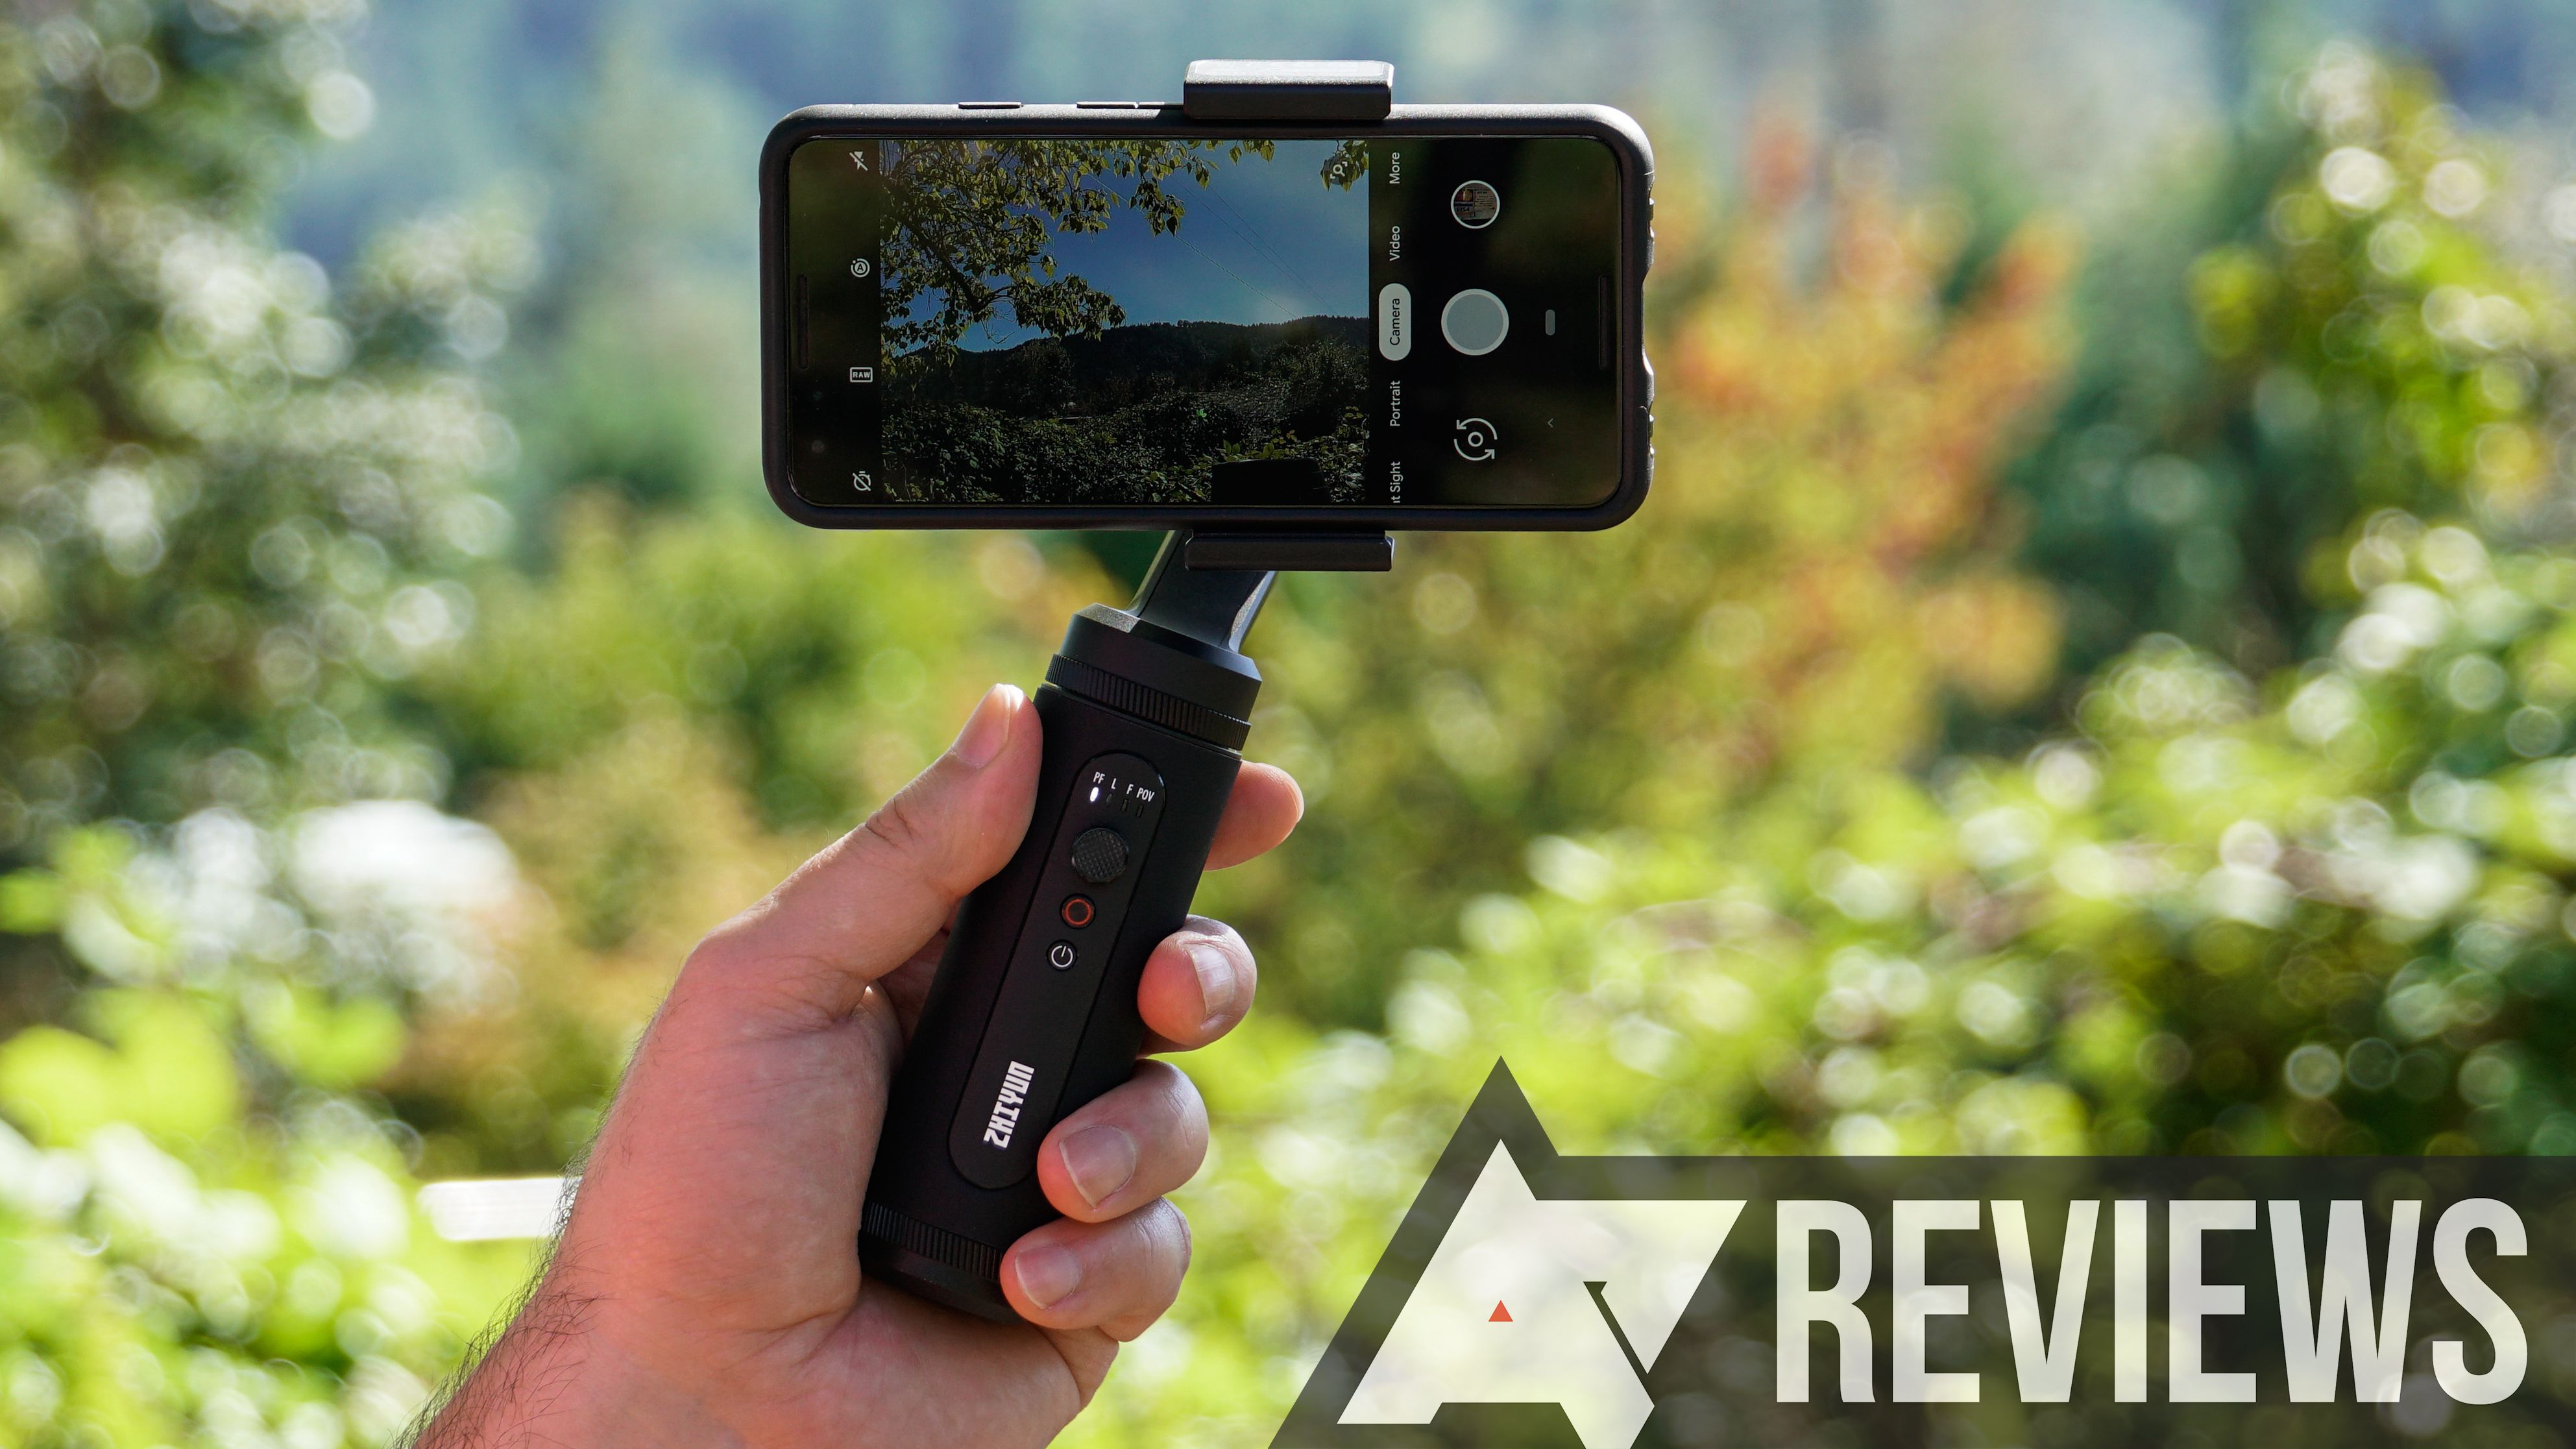 Zhiyun Smooth-Q2 review: A great travel gimbal that's perfect for beginners